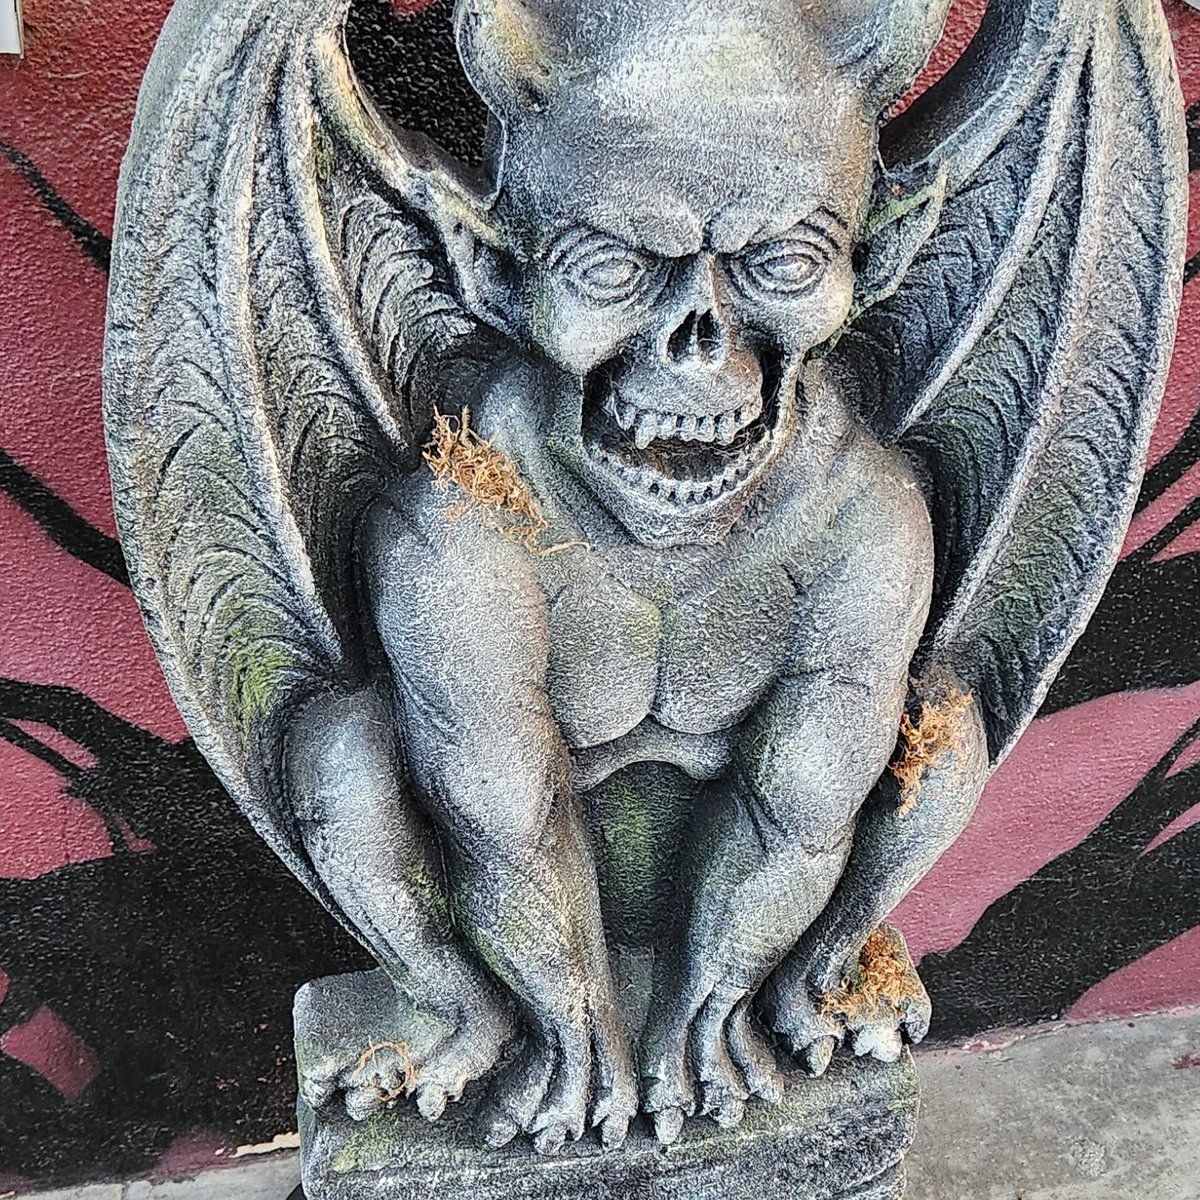 A gargoyle statue outside the Mystic Museum #TheMysticMuseum #MysticMuseum #HorrorDecor #Gargoyle